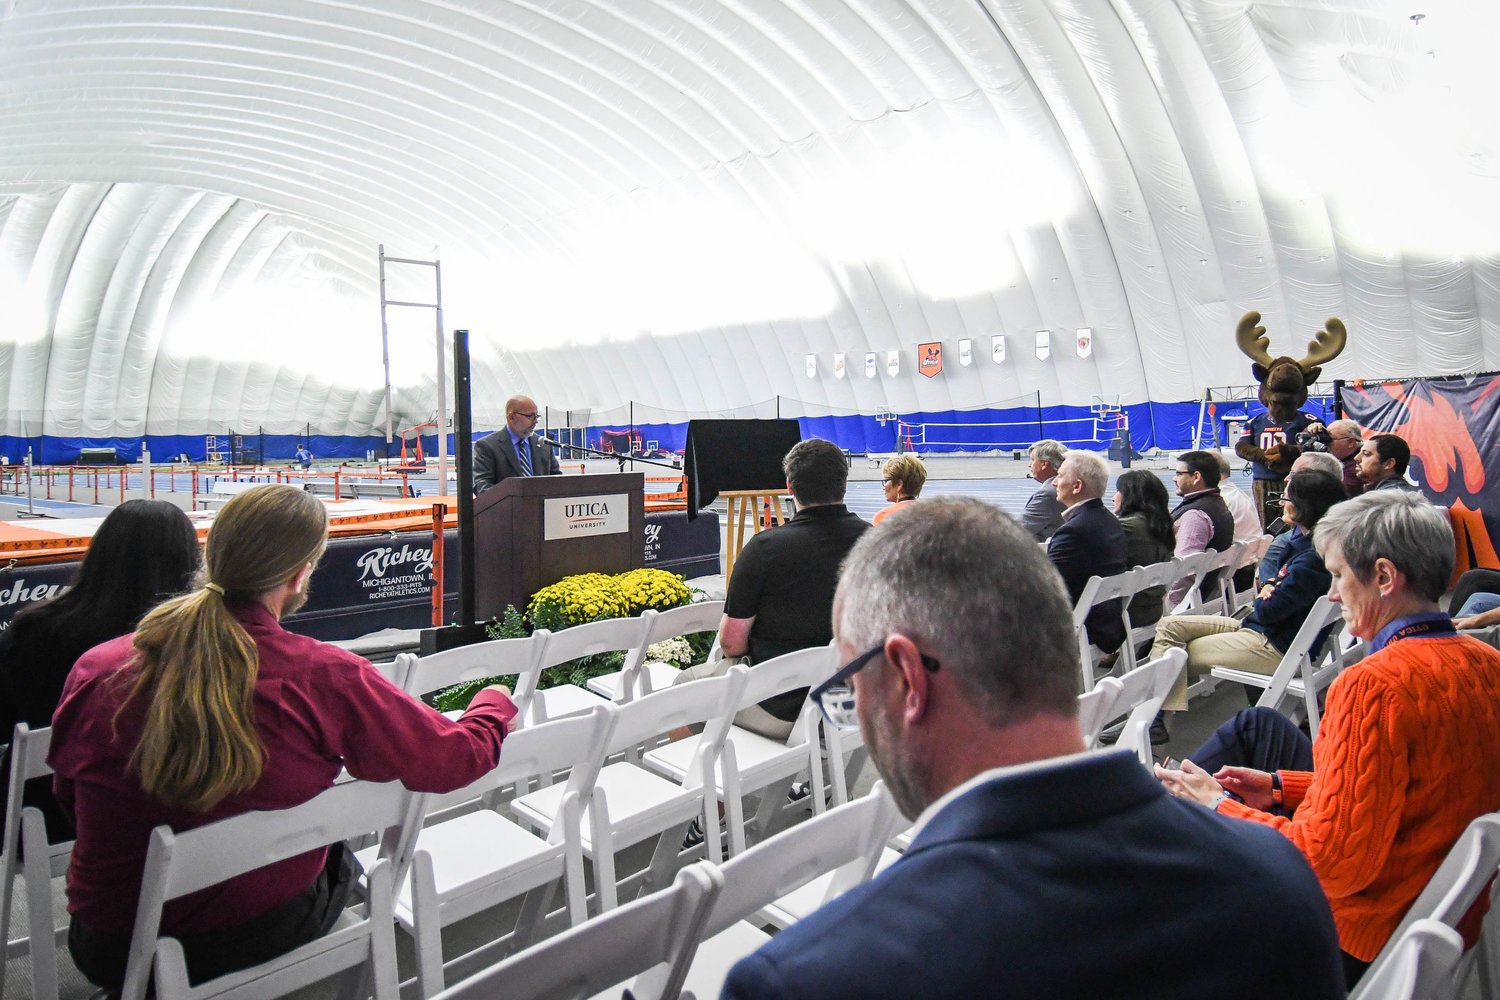 A dedication ceremony is conducted for the Lotis Howland Track on Friday at the Todd and Jen Hutton Sports & Recreation Center at Utica University.